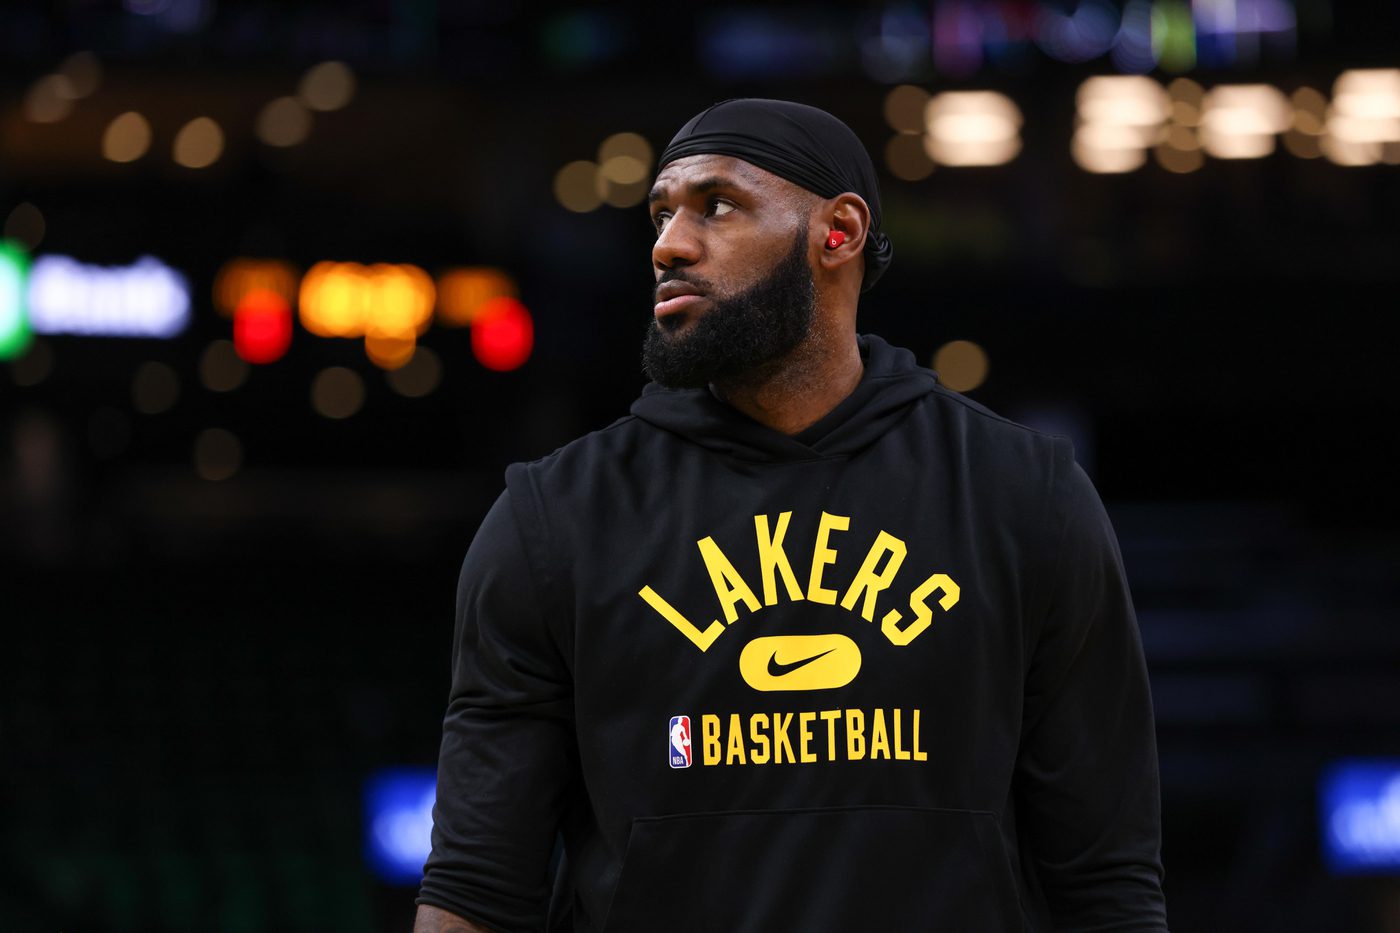 Nov 19, 2021; Boston, Massachusetts, USA; Los Angeles Lakers forward LeBron James (6) warms up before the Boston Celtics play the Los Angeles Lakers at TD Garden. Mandatory Credit: Paul Rutherford-USA TODAY Sports